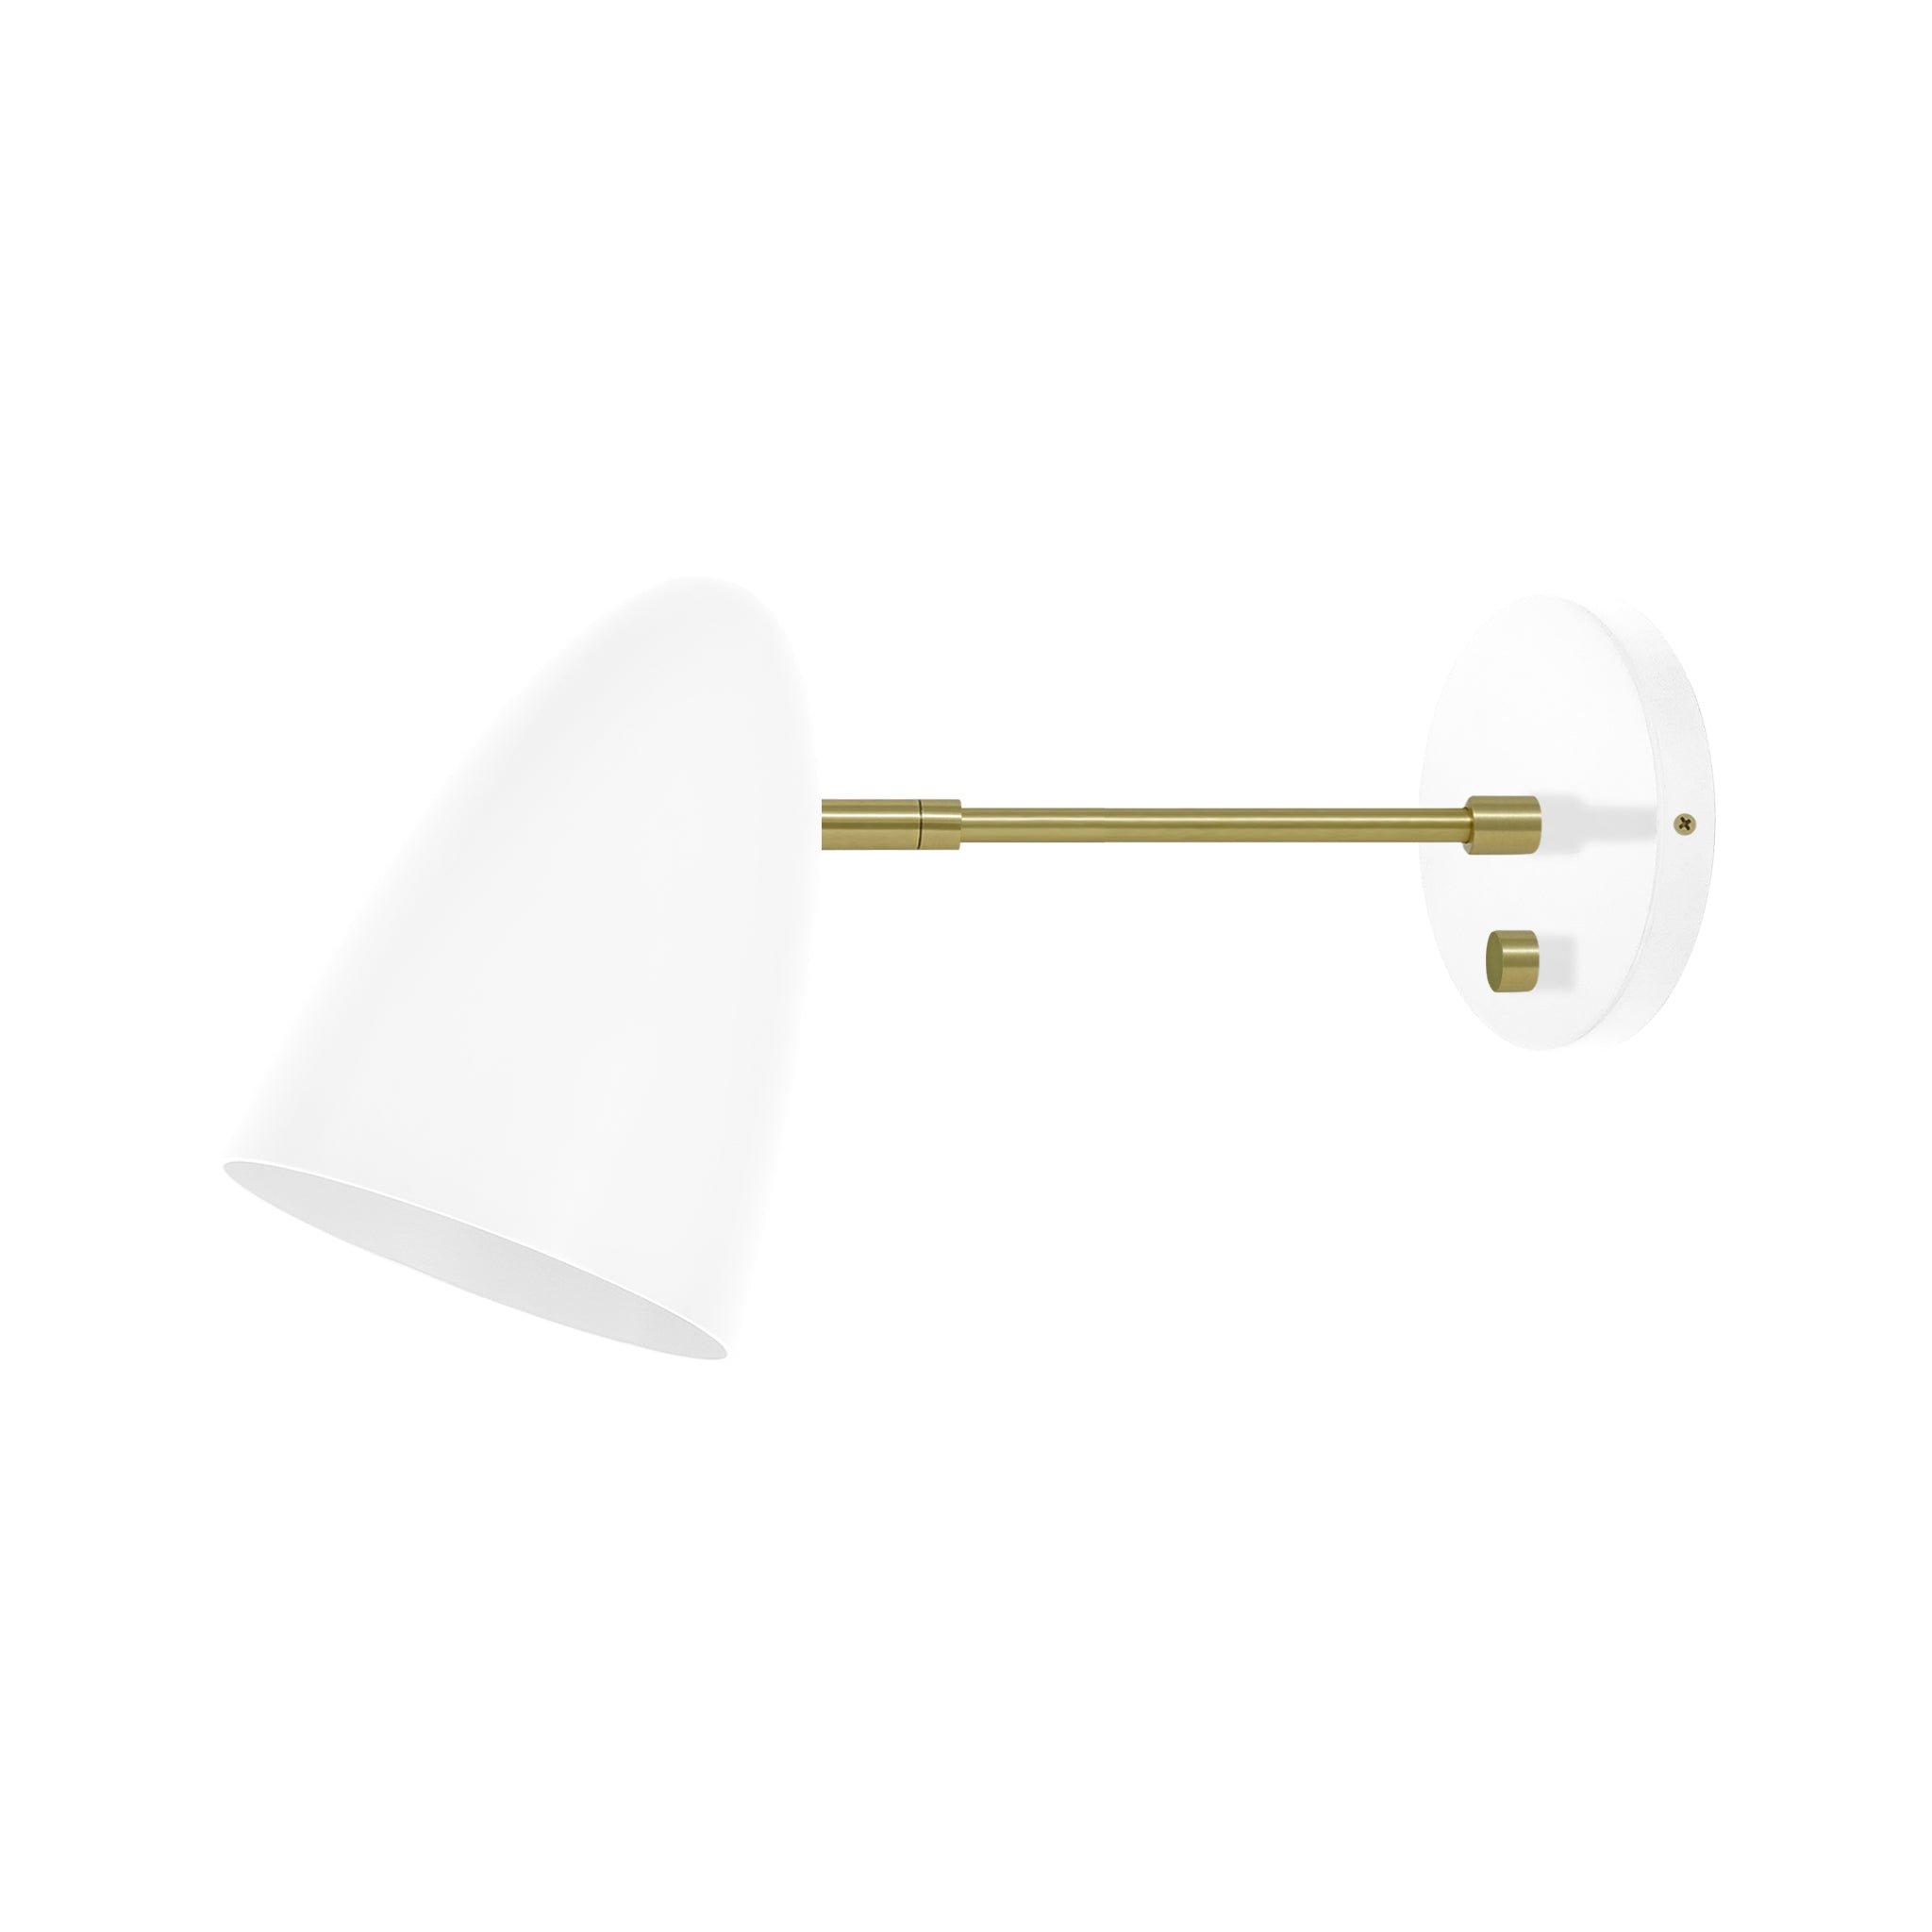 Brass and white color Boom sconce 6" arm Dutton Brown lighting